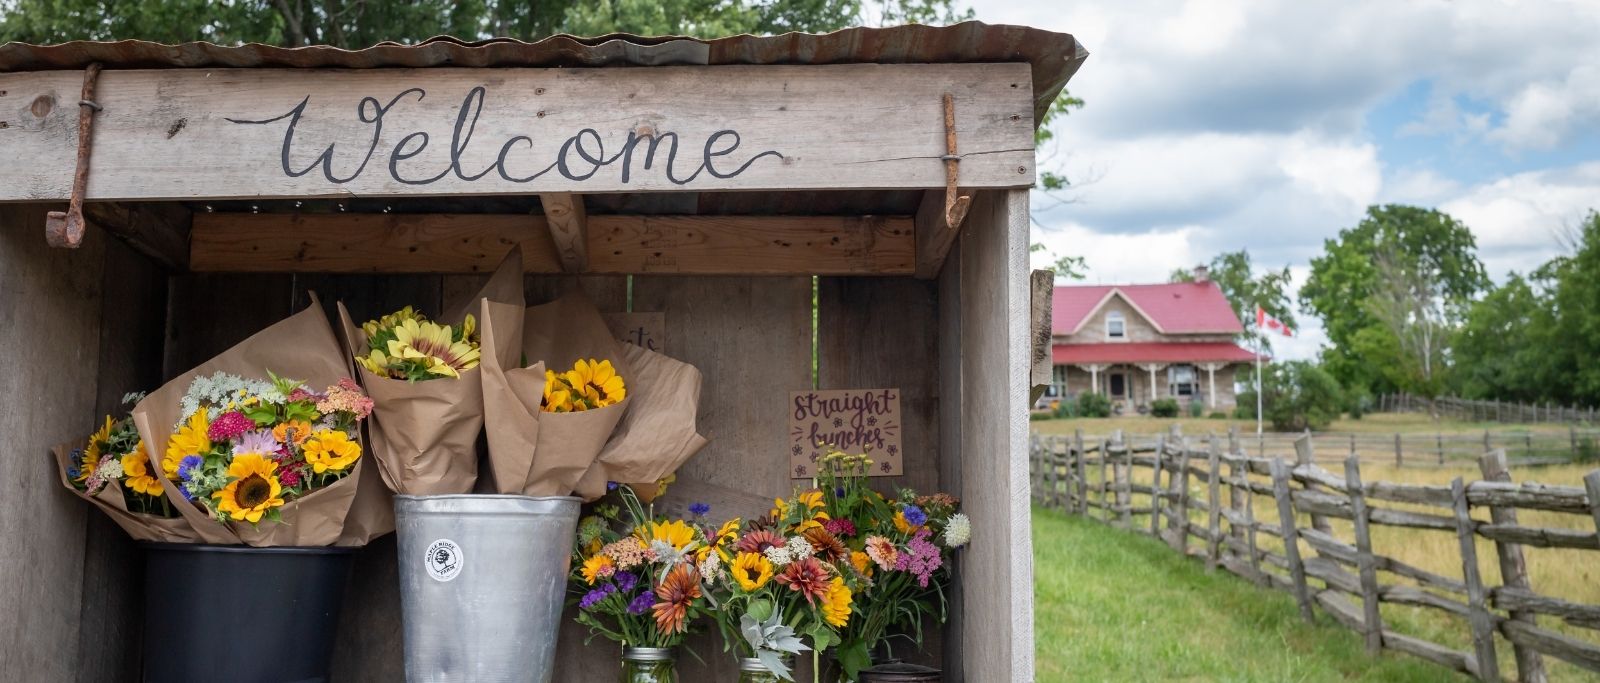 bouquets of flowers at a farm stand; farmhouse in background